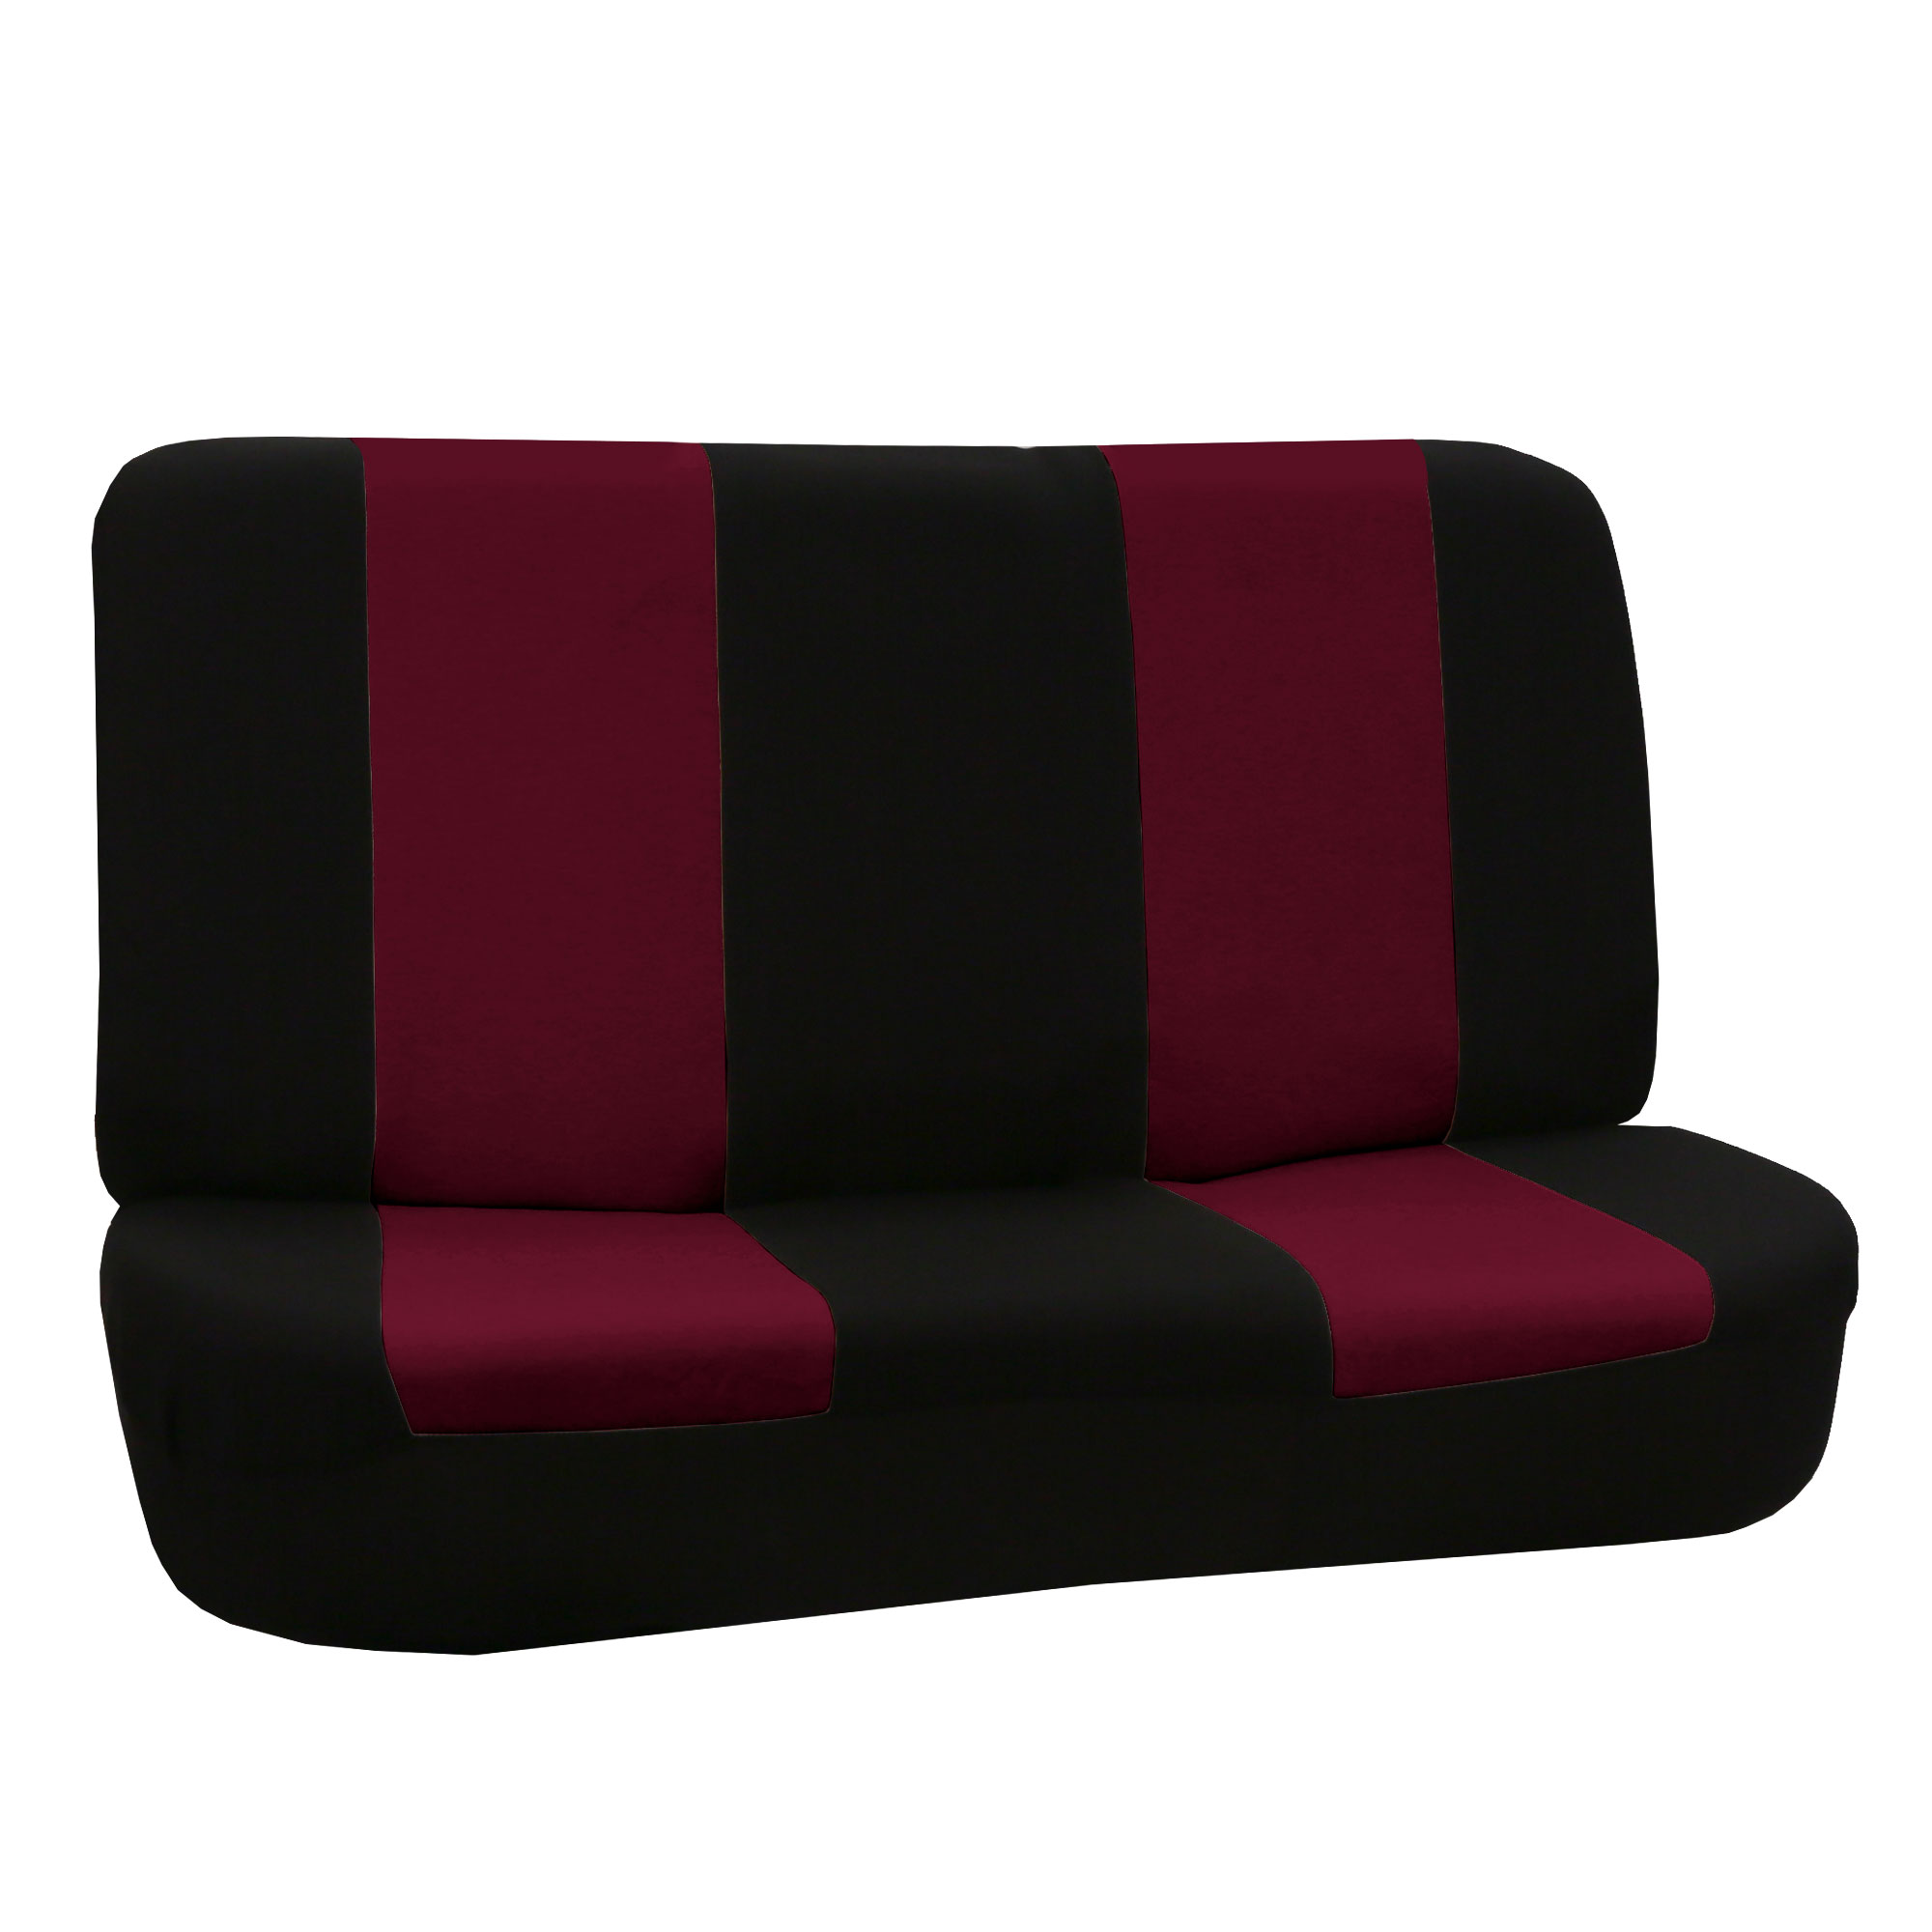 FH Group Universal Flat Cloth Fabric 2 Headrests Full Set Car Seat Cover, Burgundy and Black - image 3 of 3